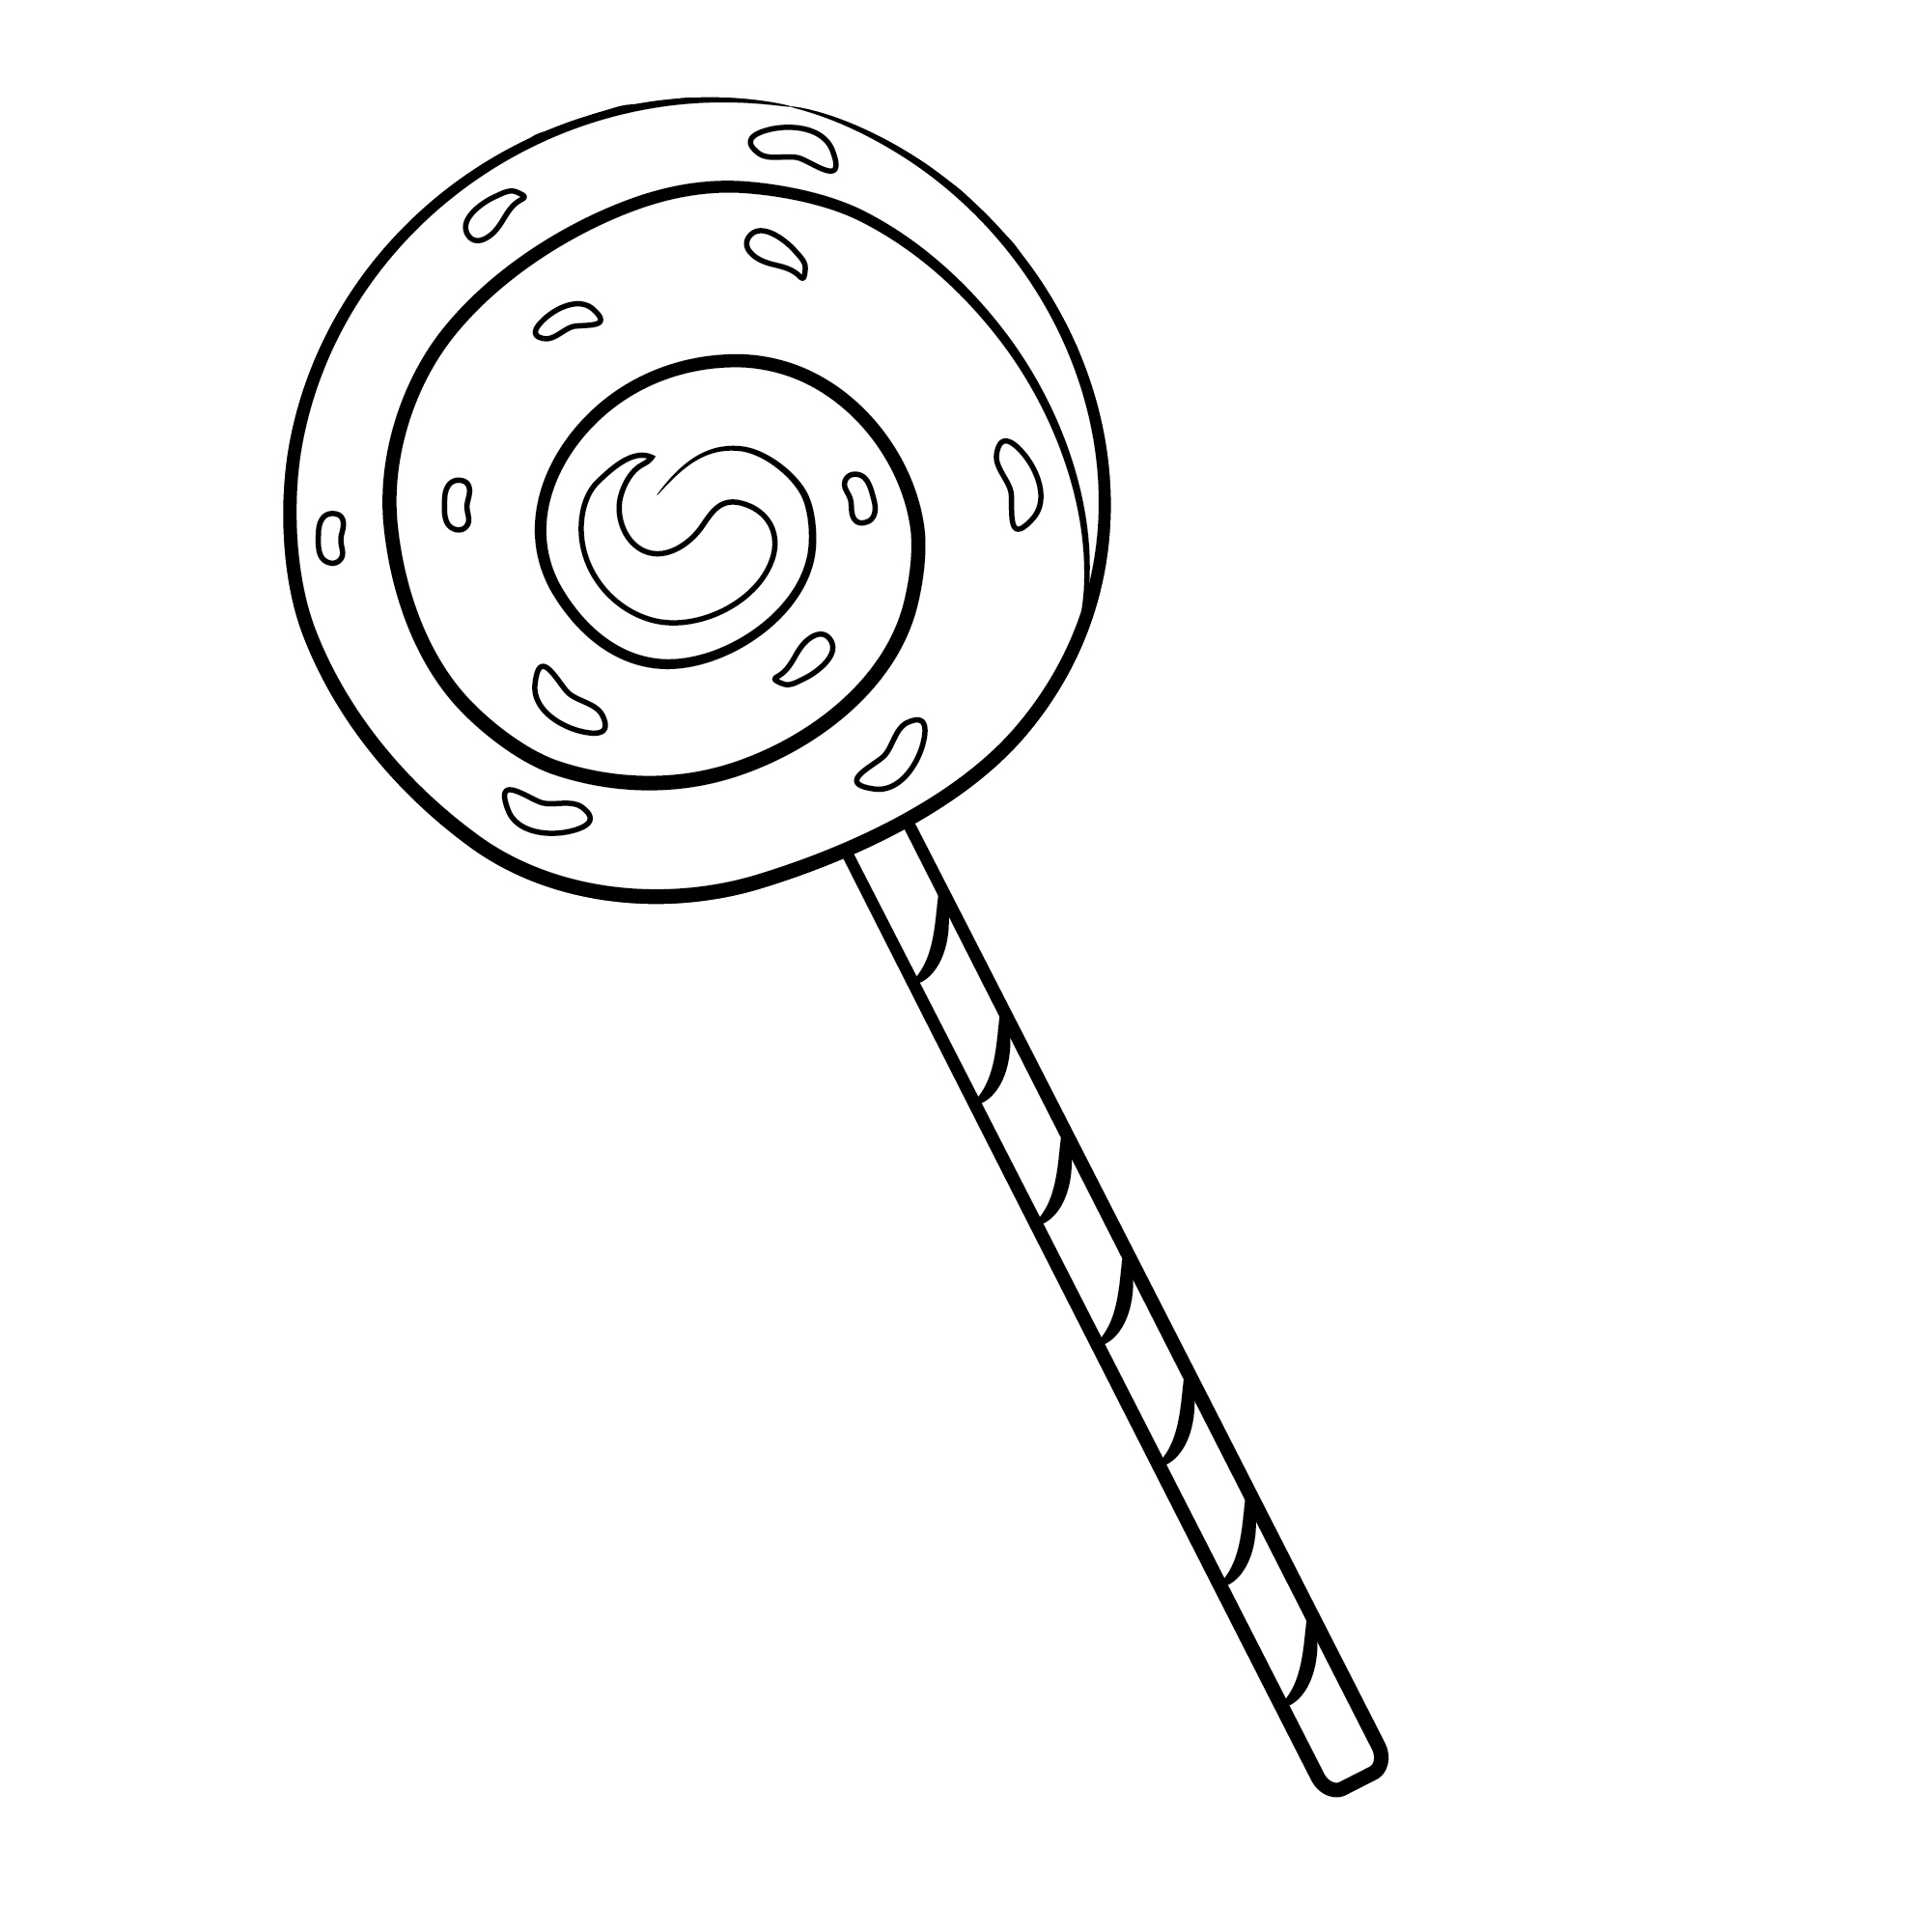 Lollipop Coloring Page Lollipop Coloring Pages Best Coloring Pages For Kids